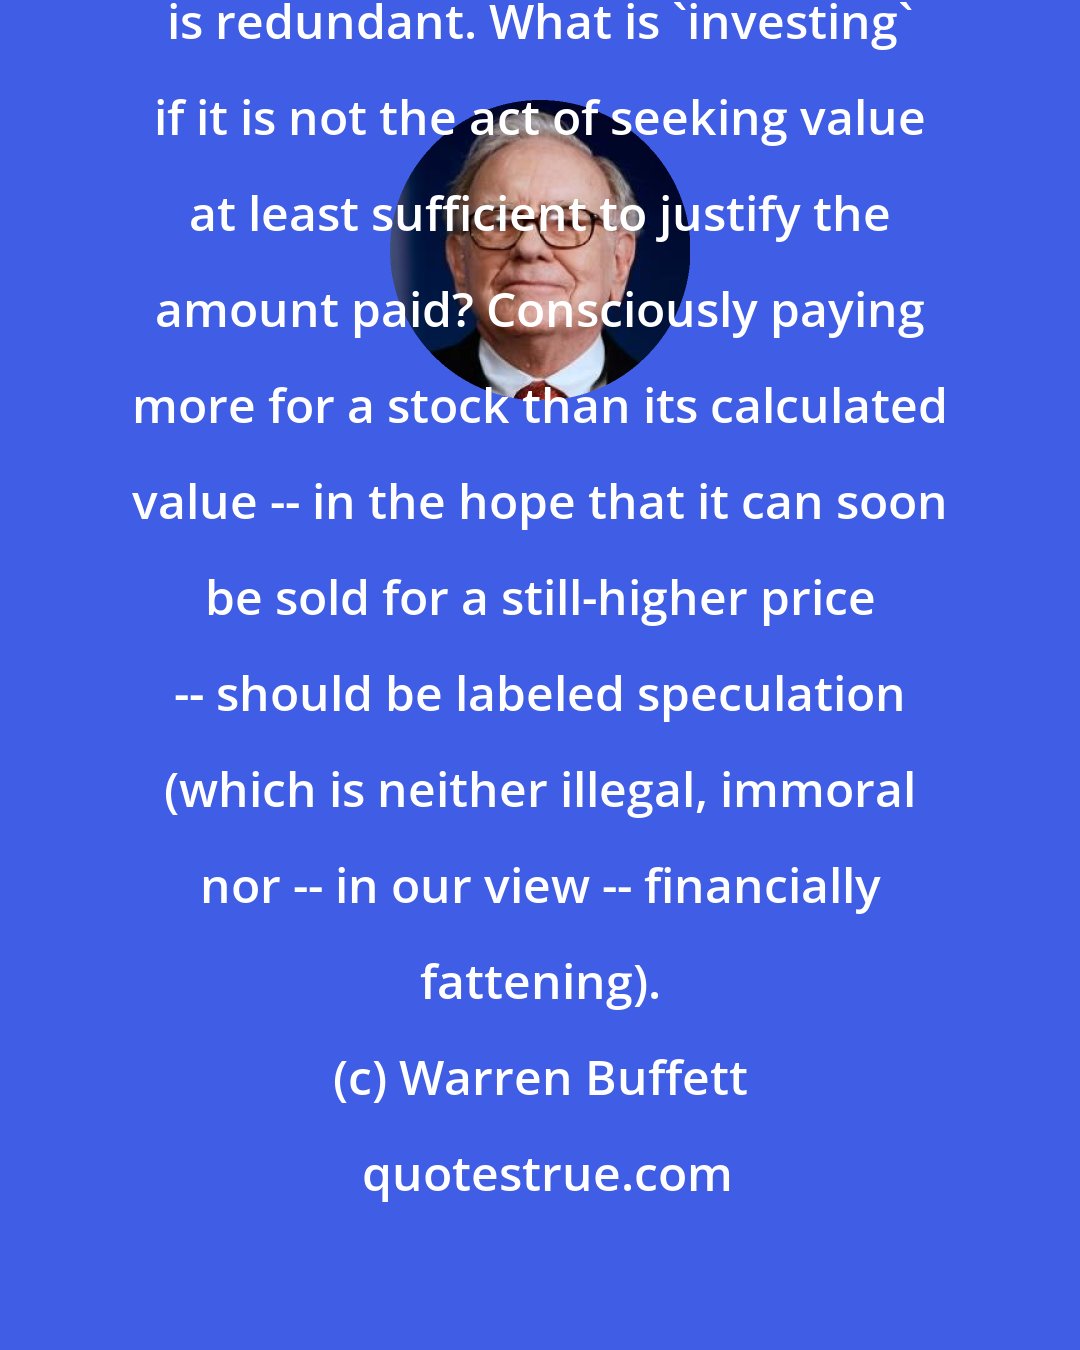 Warren Buffett: [W]e think the very term 'value investing' is redundant. What is 'investing' if it is not the act of seeking value at least sufficient to justify the amount paid? Consciously paying more for a stock than its calculated value -- in the hope that it can soon be sold for a still-higher price -- should be labeled speculation (which is neither illegal, immoral nor -- in our view -- financially fattening).